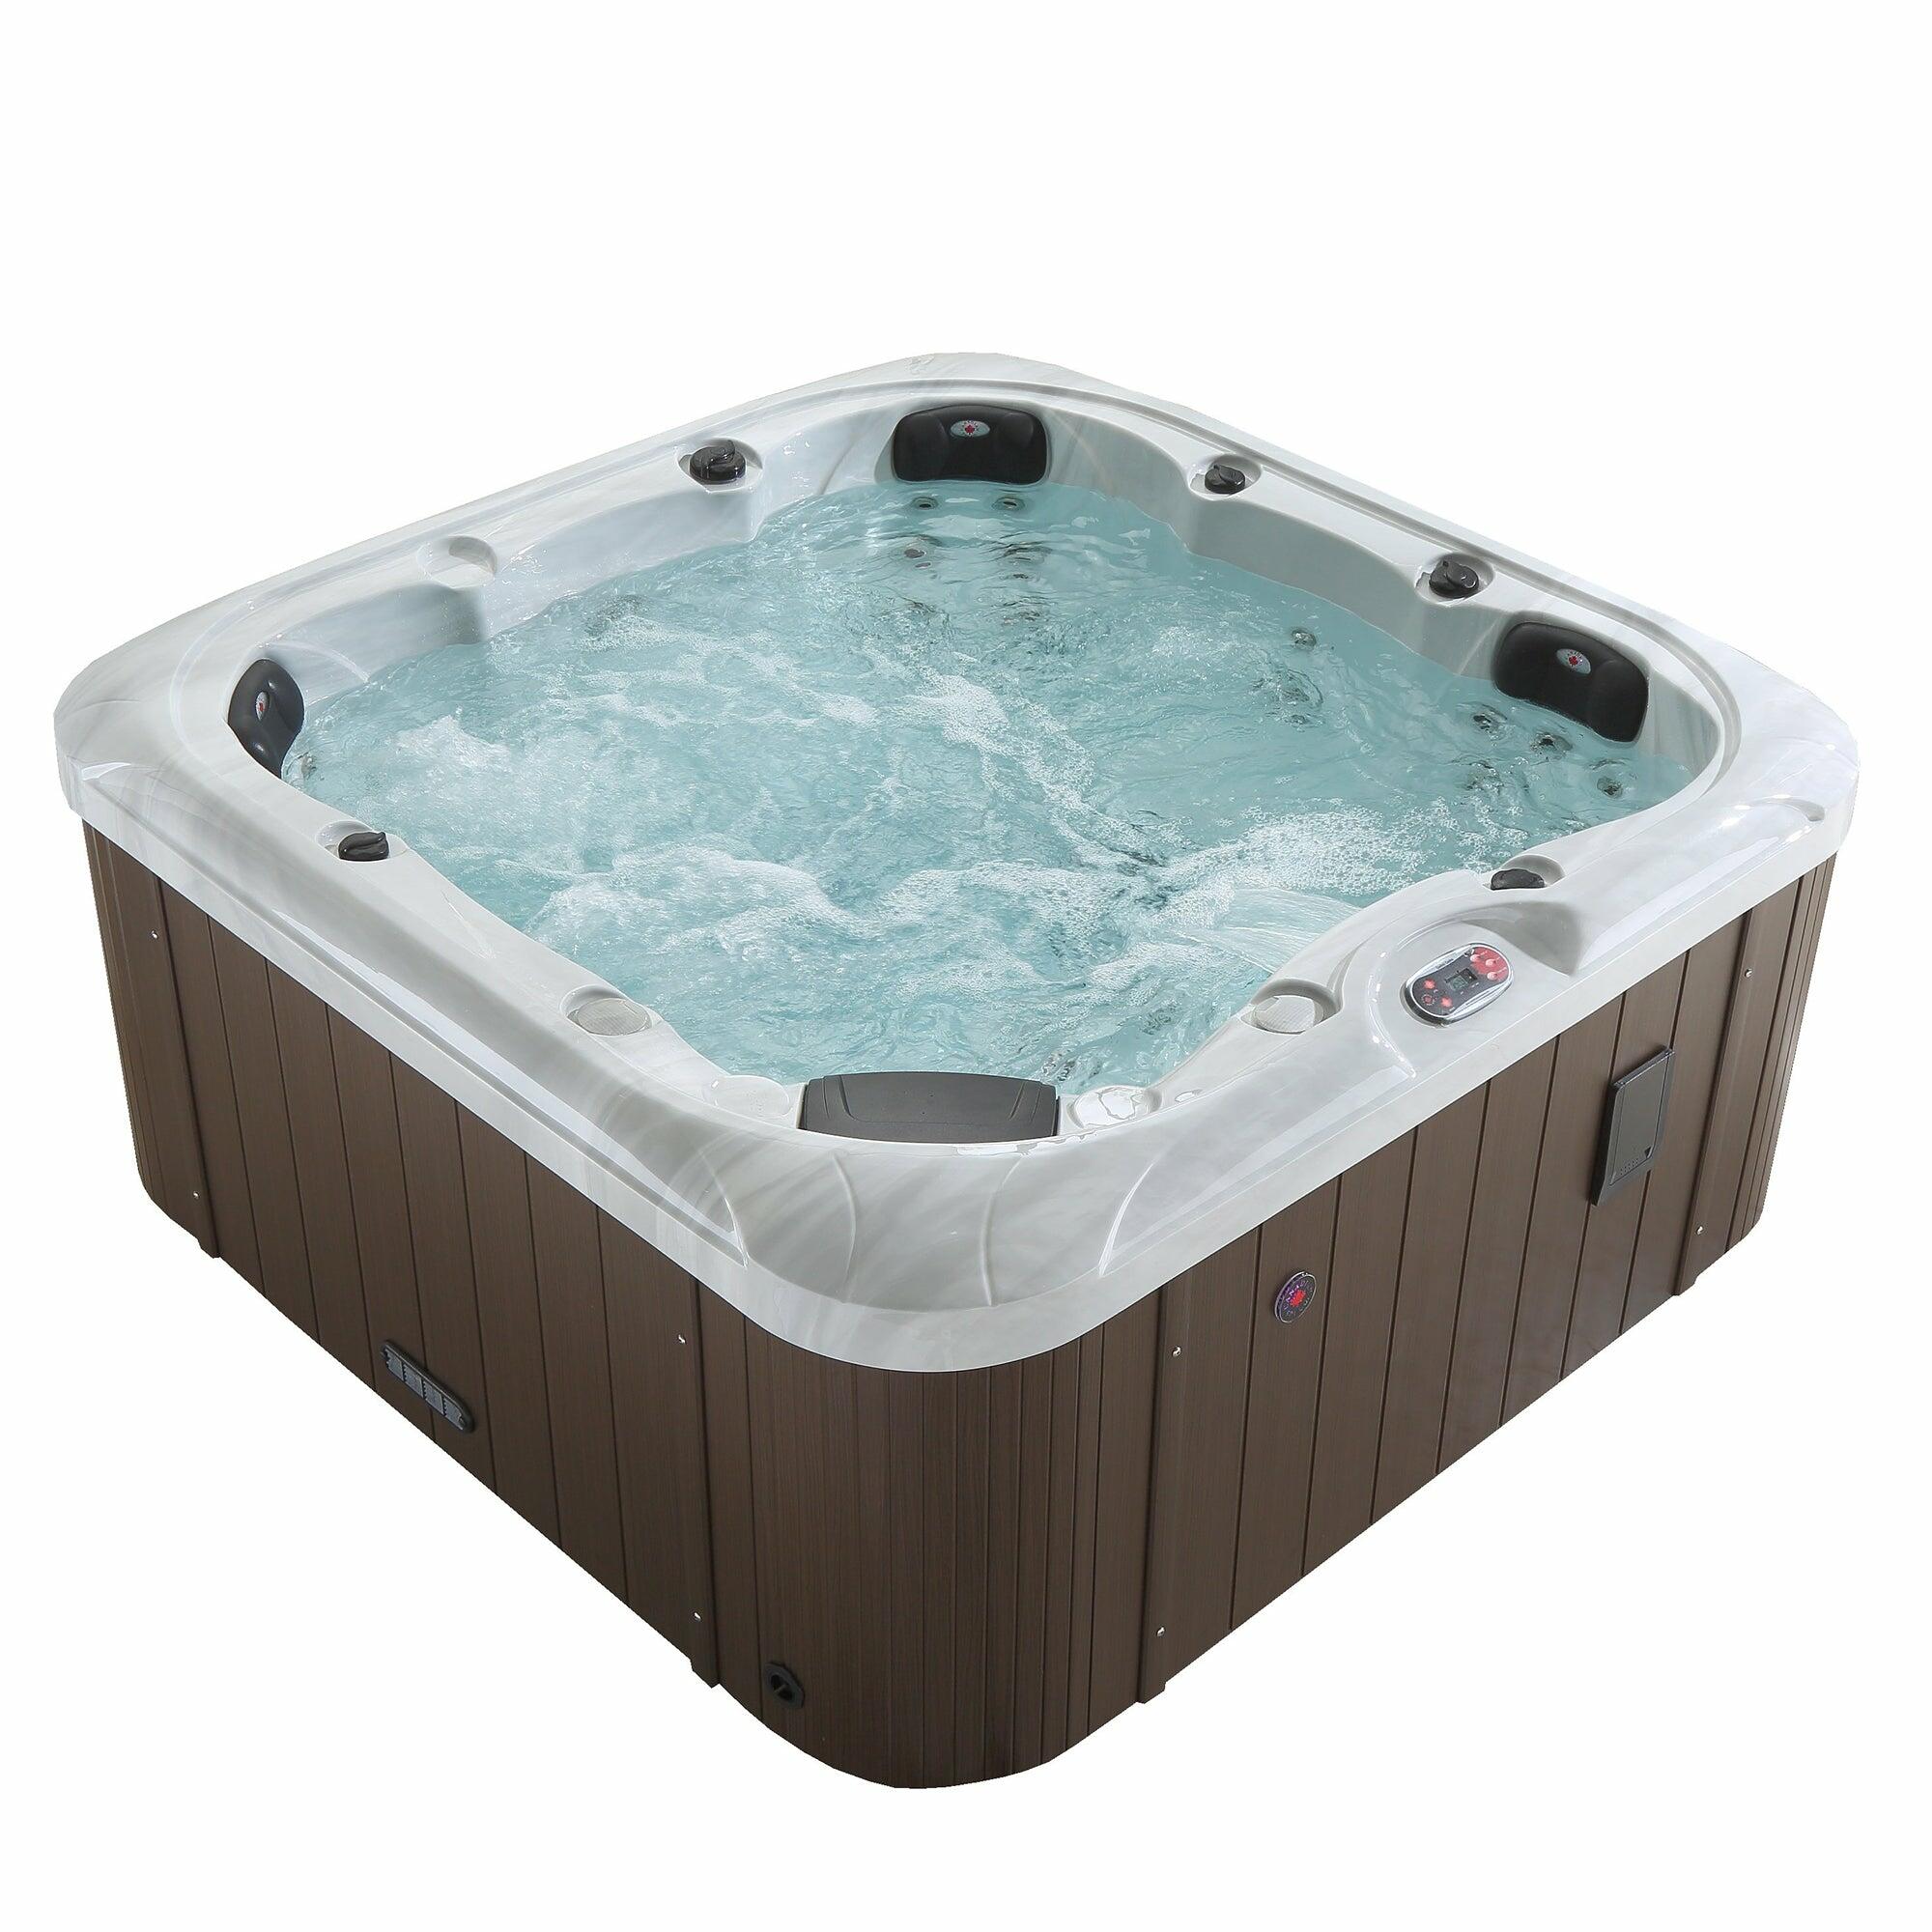 An image of Canadian Spa Cambridge 33 Jet 6 Person Hot Tub